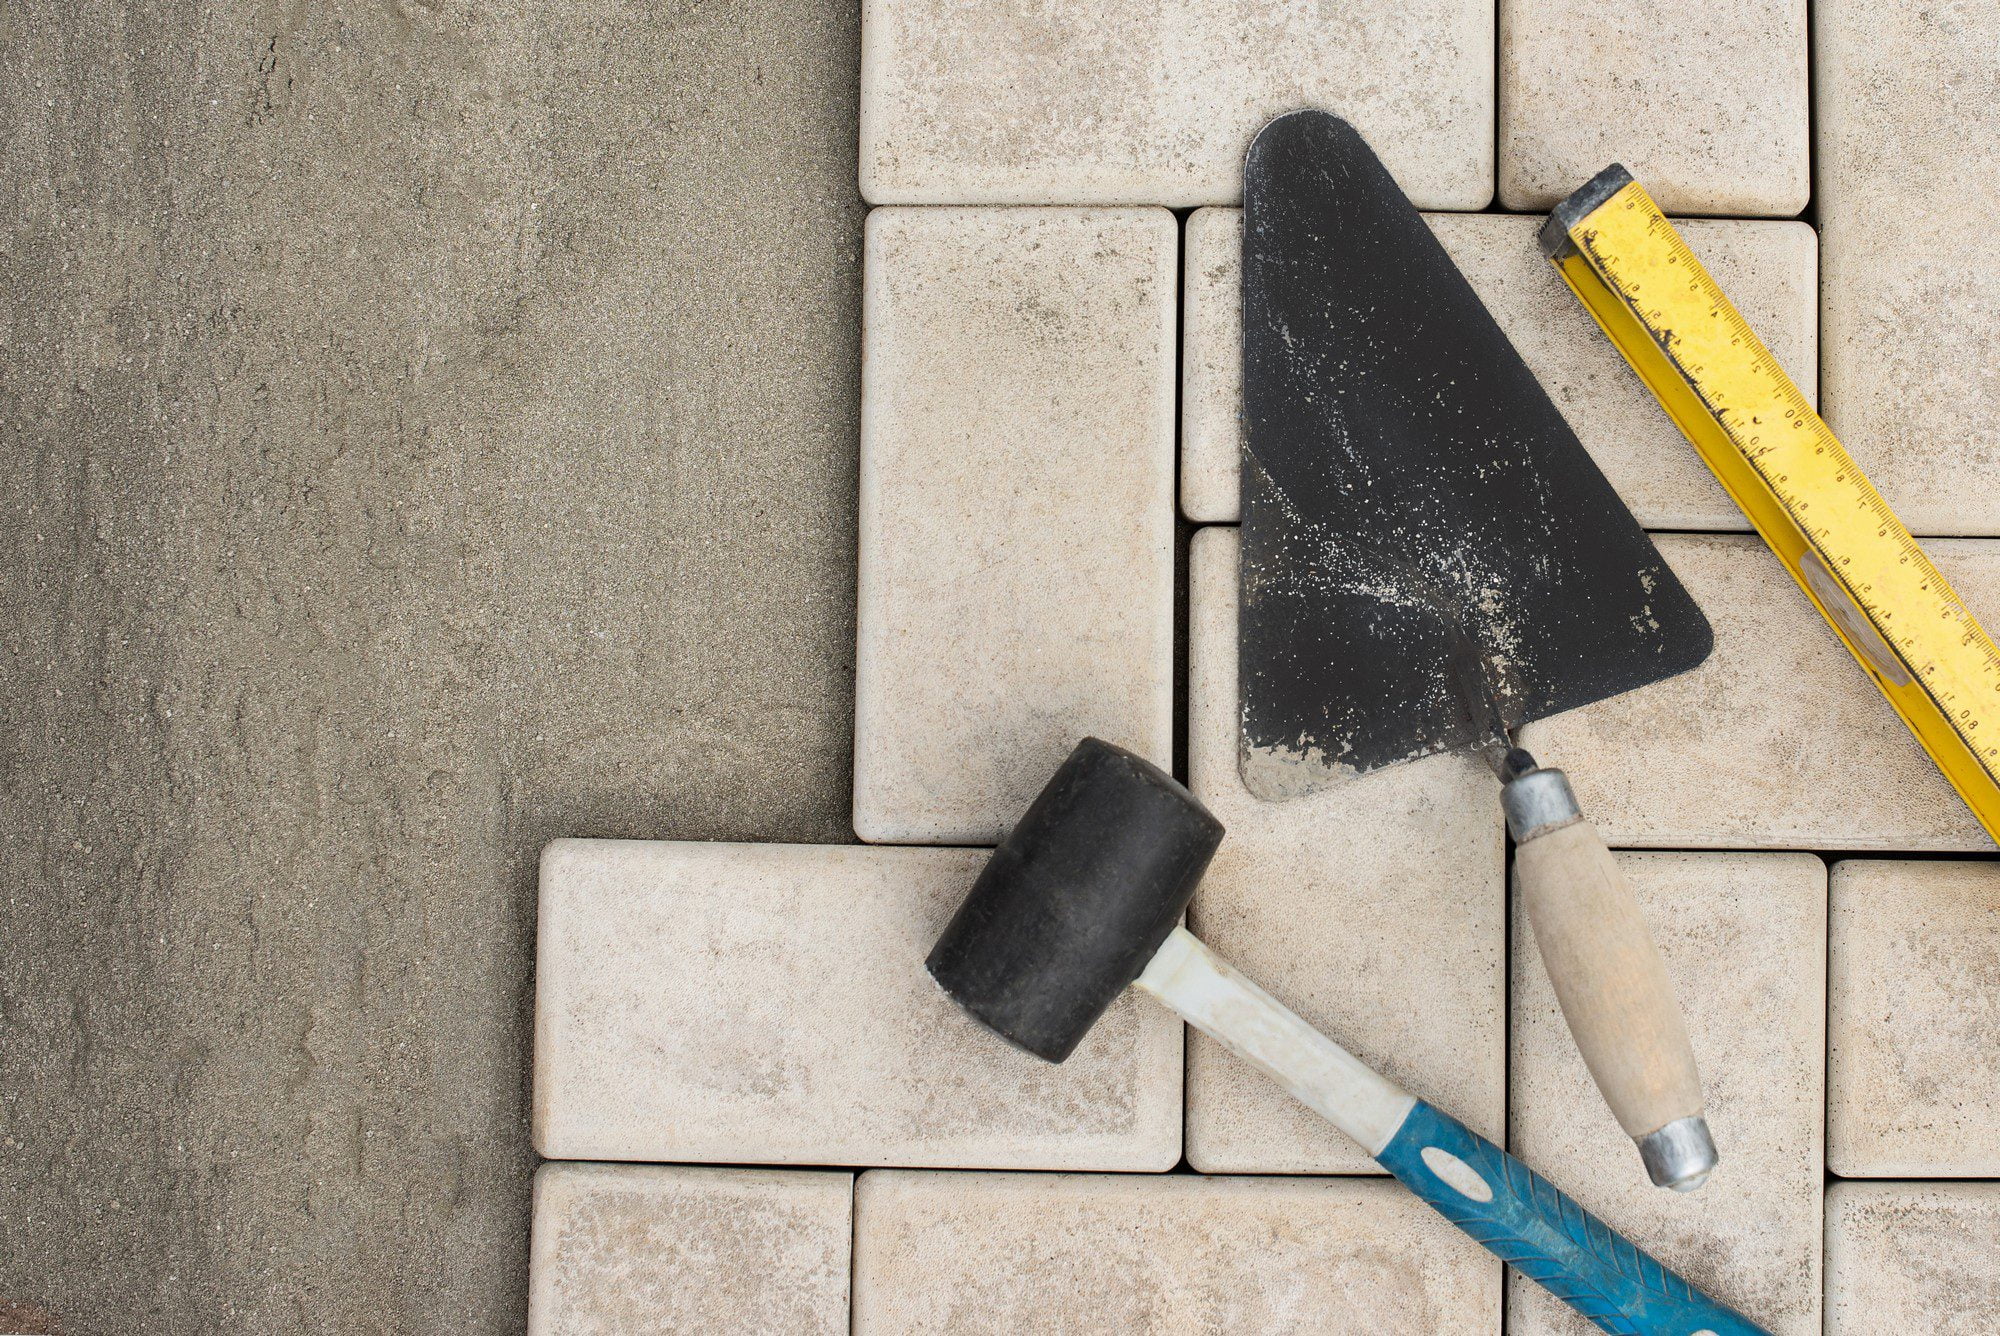 The image shows a collection of tools and materials typically used in laying or repairing paving stones. There is a rubber mallet, a trowel with remnants of a powdery substance (possibly sand or cement), and a yellow folding ruler. These tools are placed on top of and next to paving stones, some of which are laid down, while one seems to be partially lifted or not yet fully set in place. This suggests some sort of construction or maintenance work involving the paving stones is taking place.